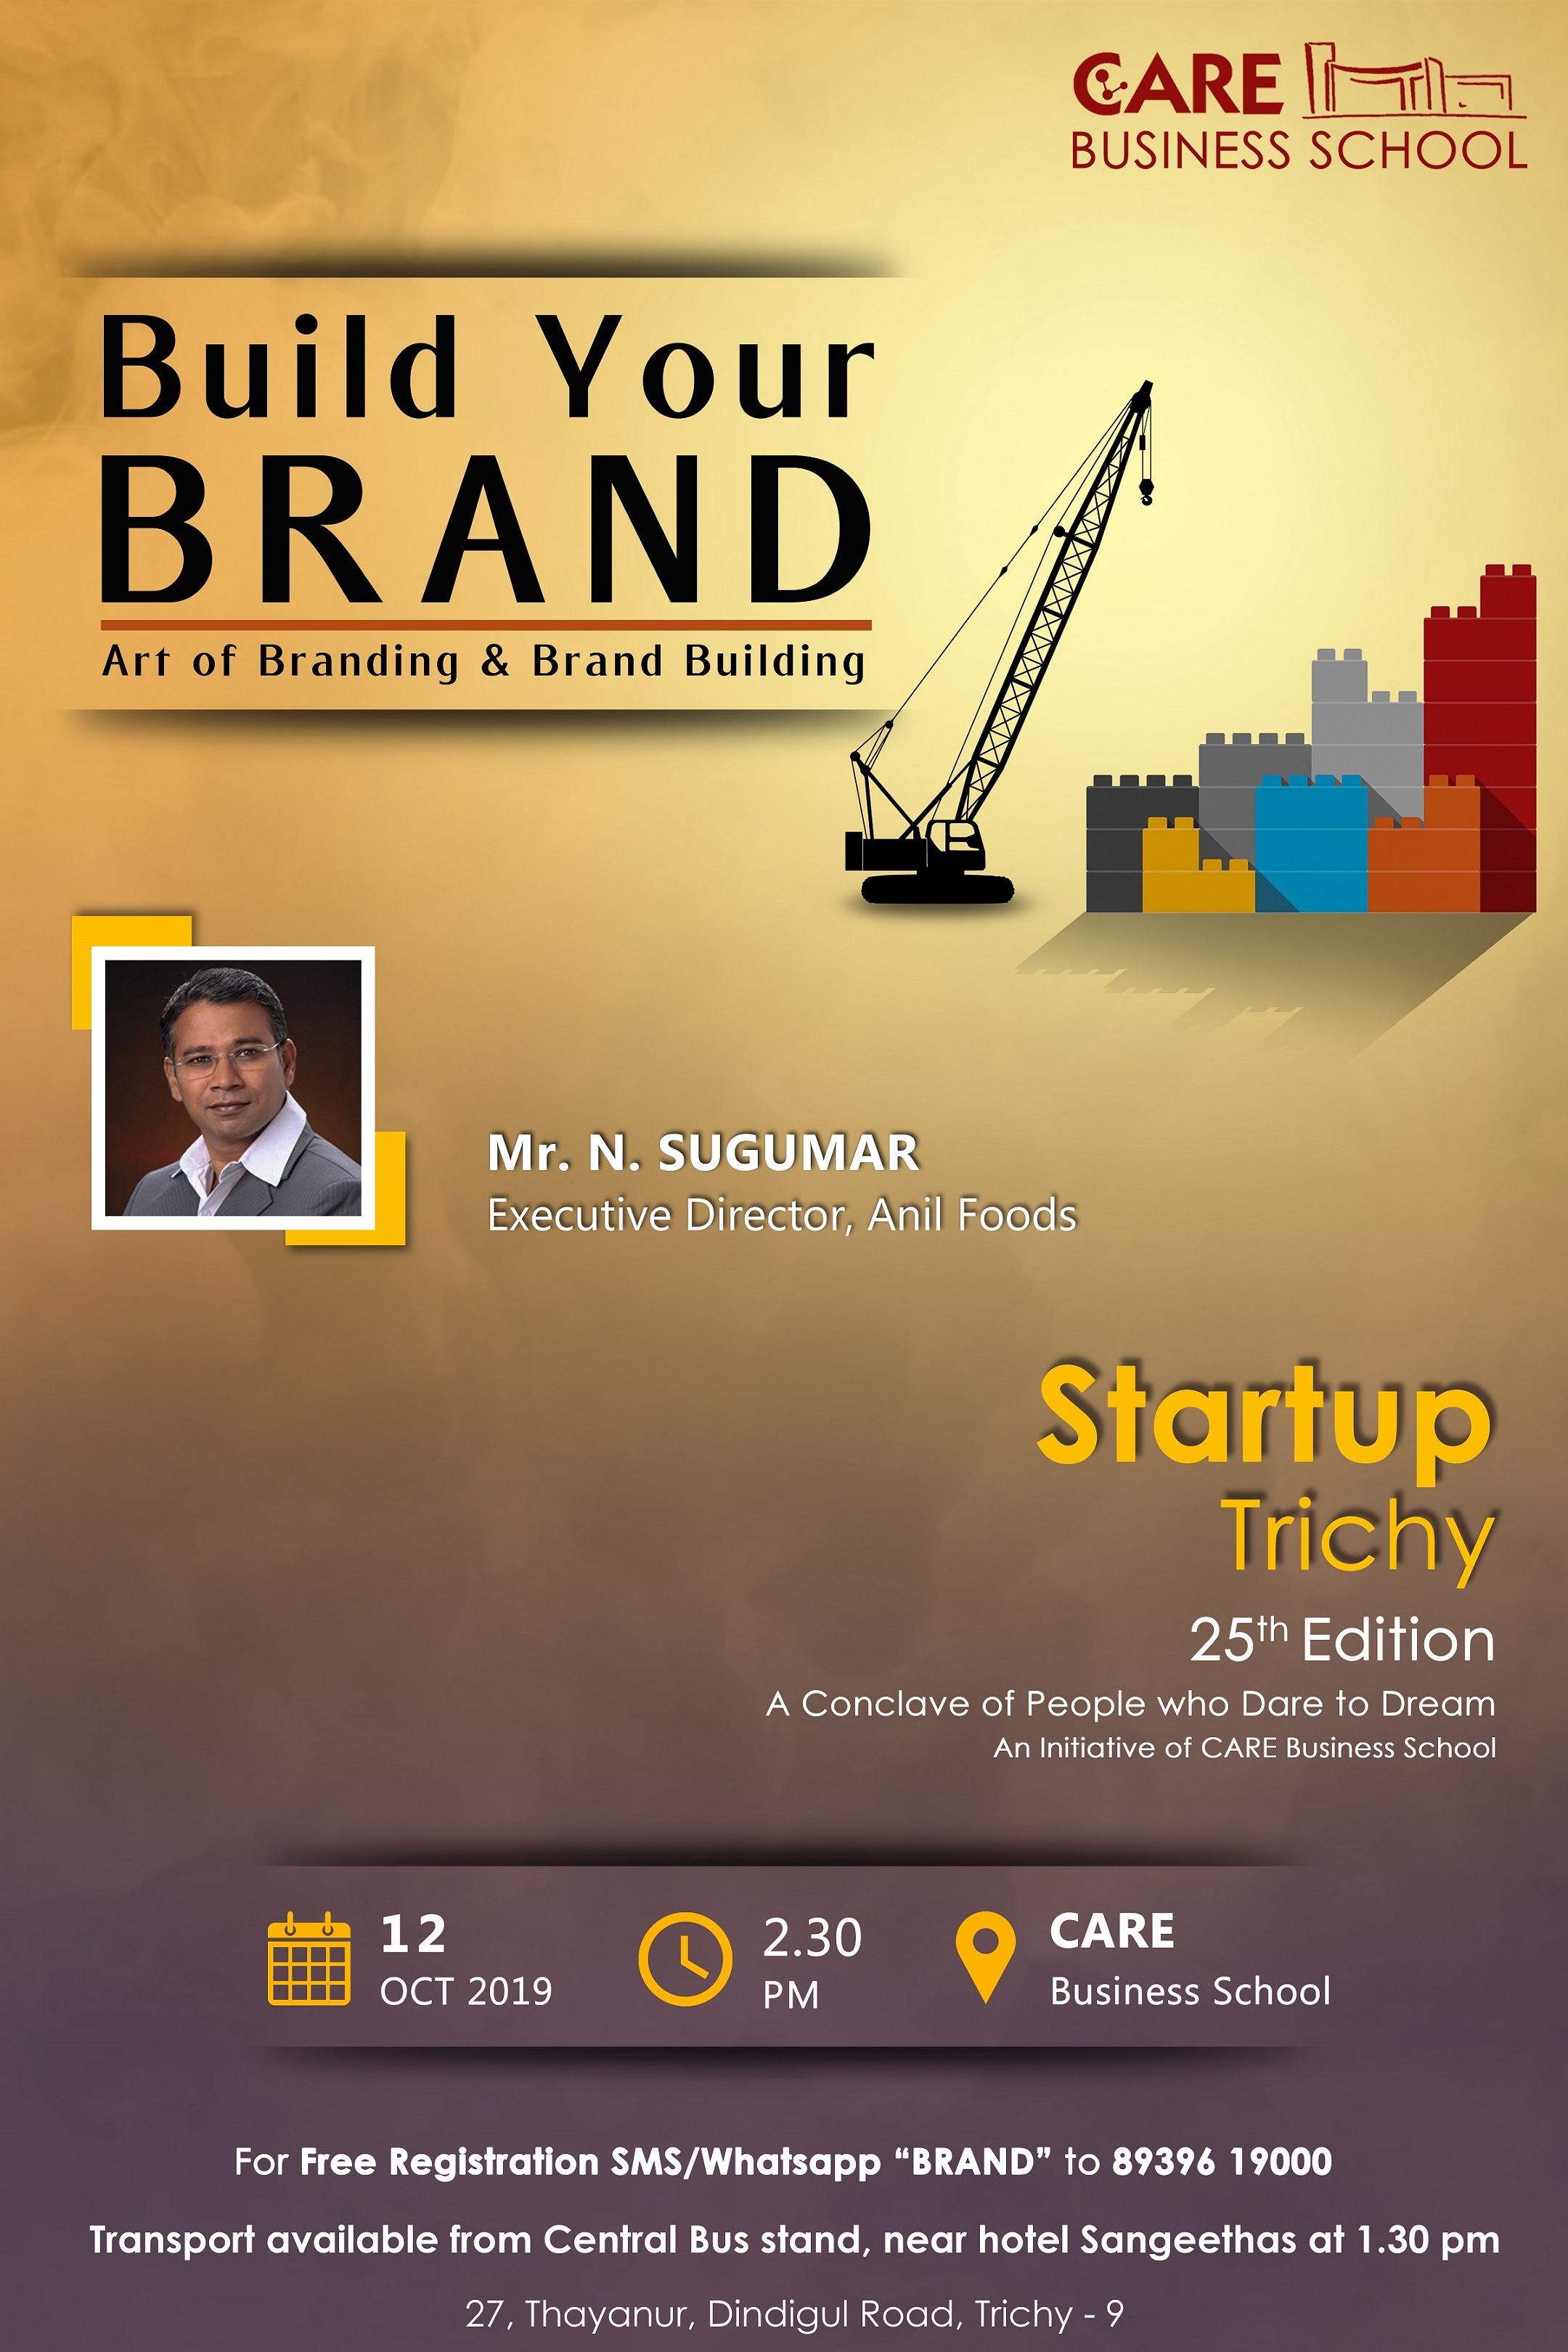 Build Your Brand 2019